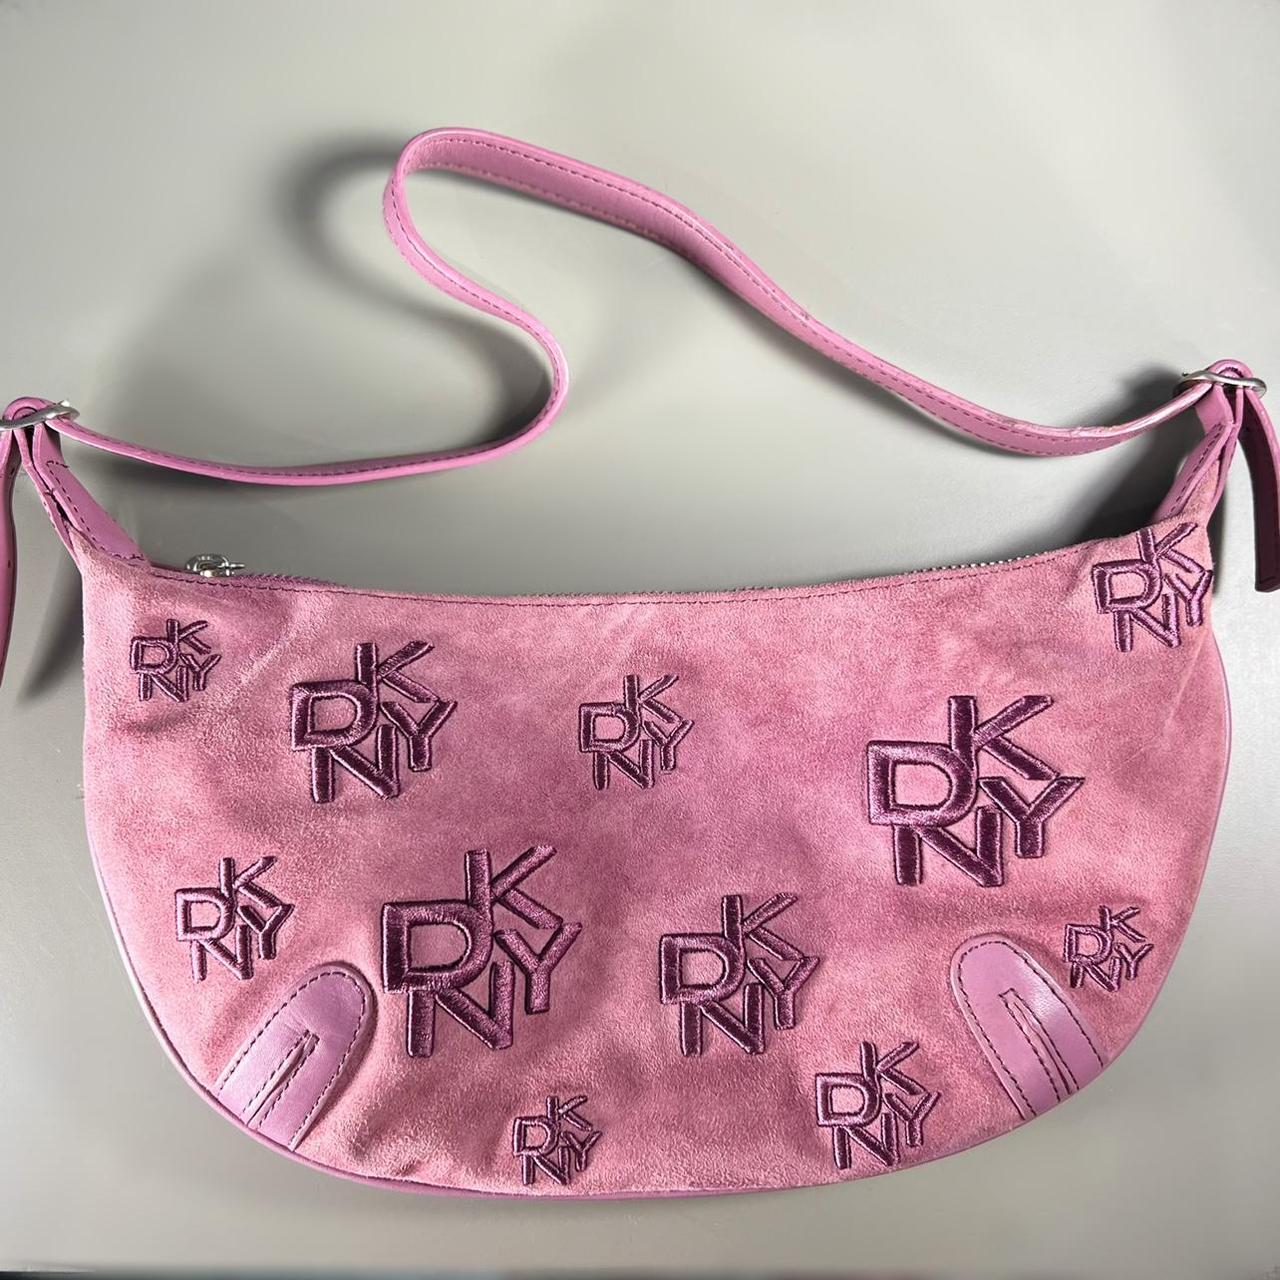 DKNY Women's Pink and Purple Bag